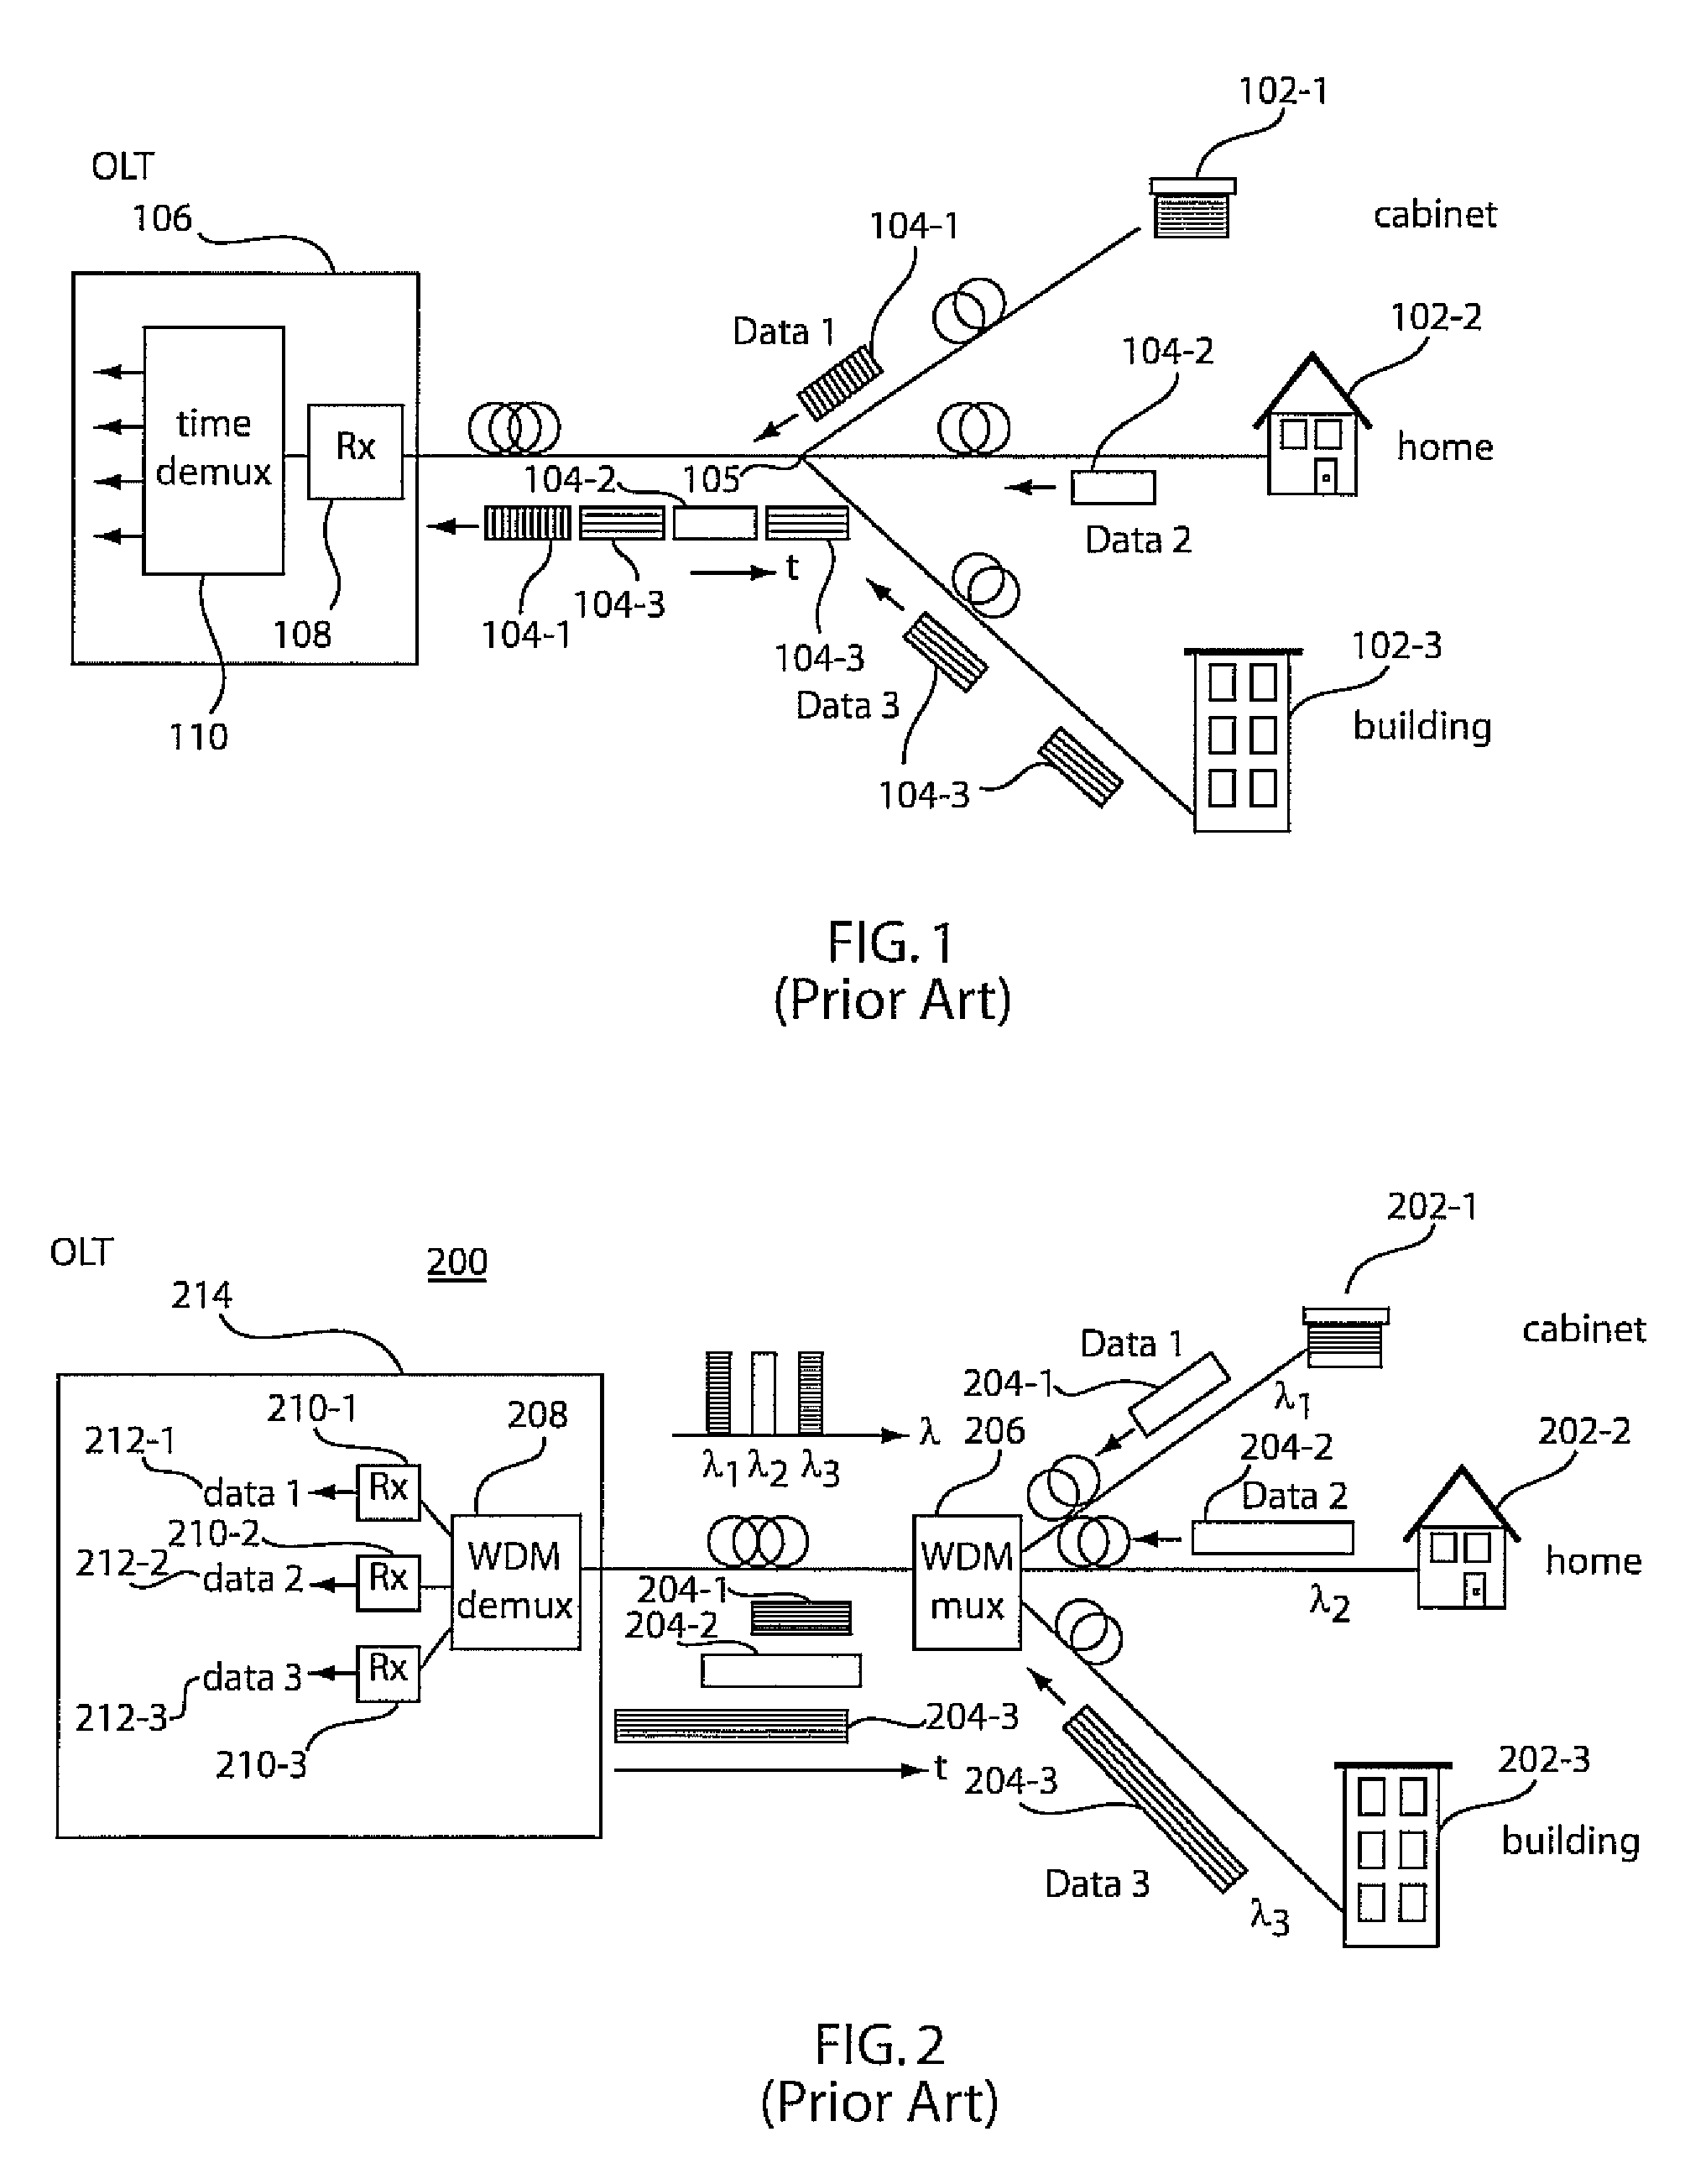 Passive optical network system employing sub-carrier multiplexing and orthogonal frequency division multiple access modulation schemes